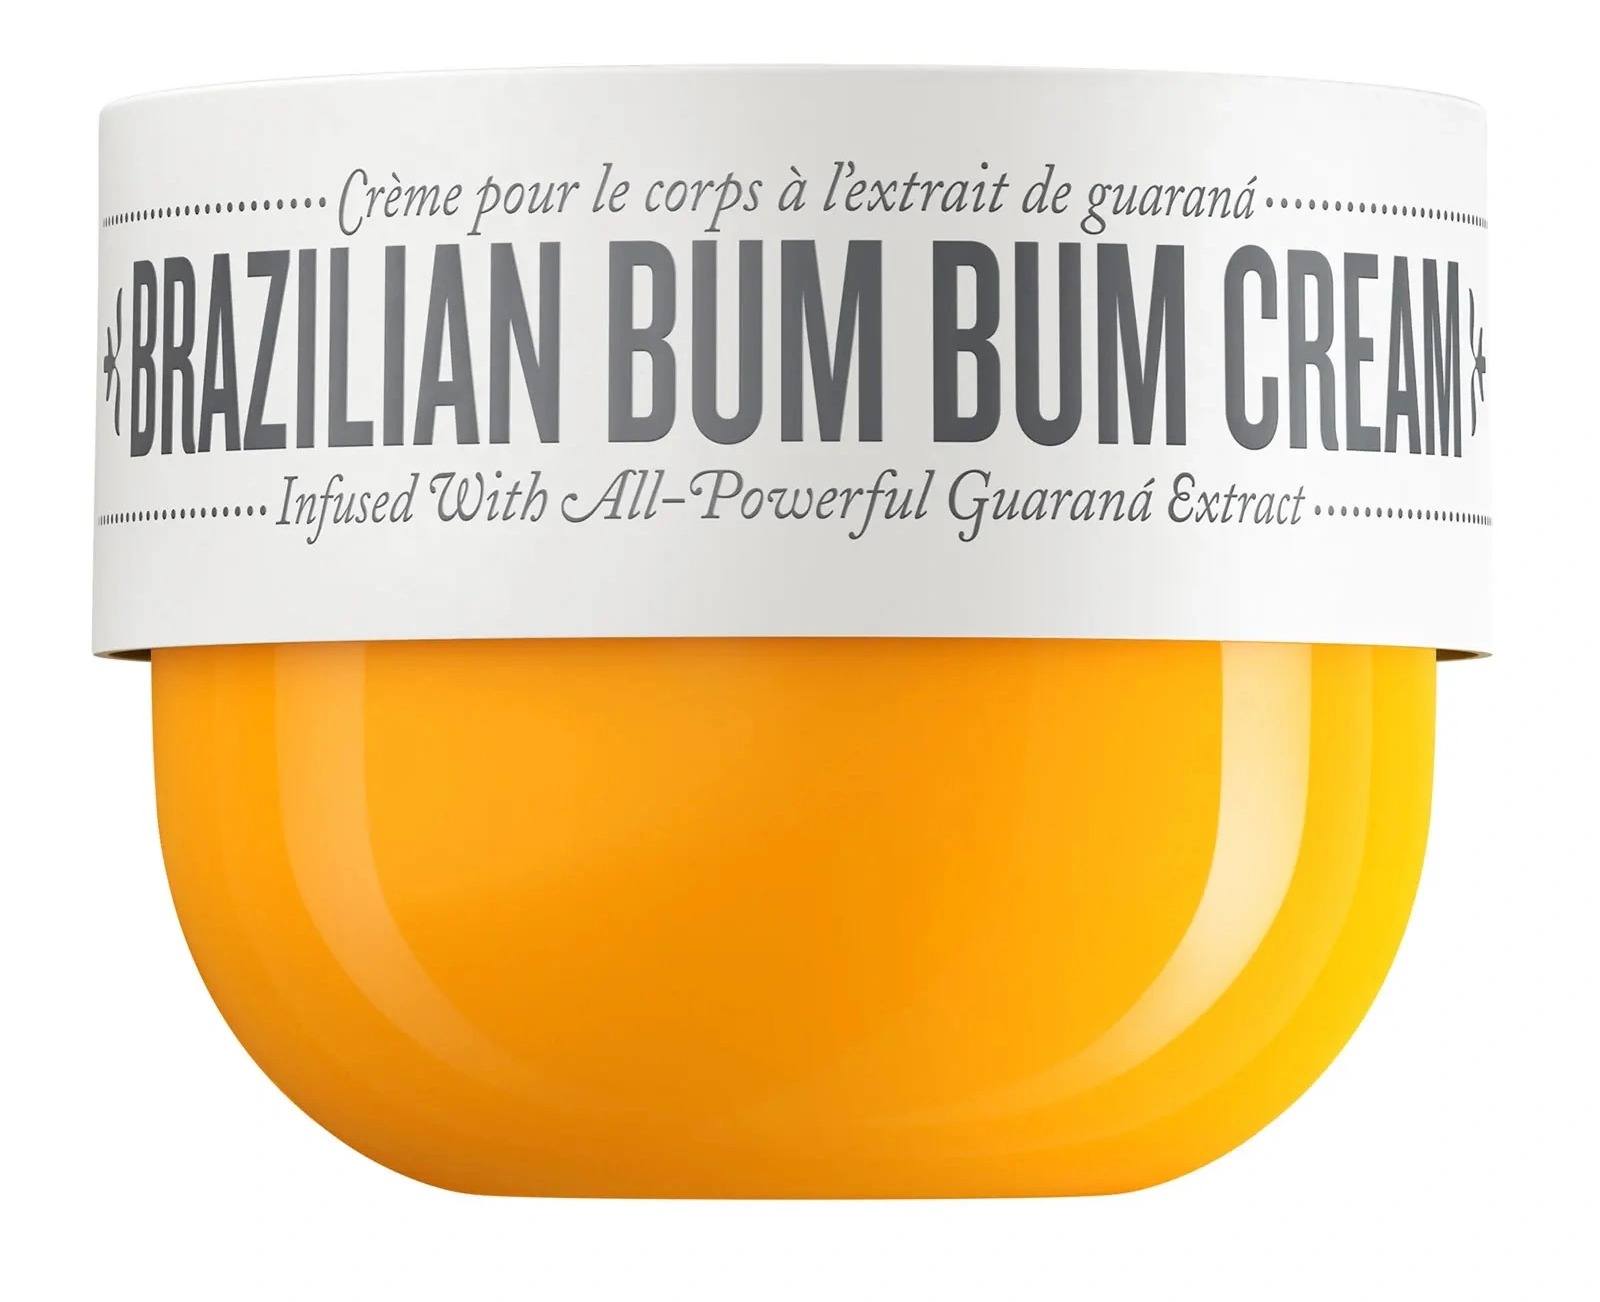 Sol de Janeiro’s rich and smoothing Brazilian Bum Bum Cream is £40.80 from Sephora.co.uk